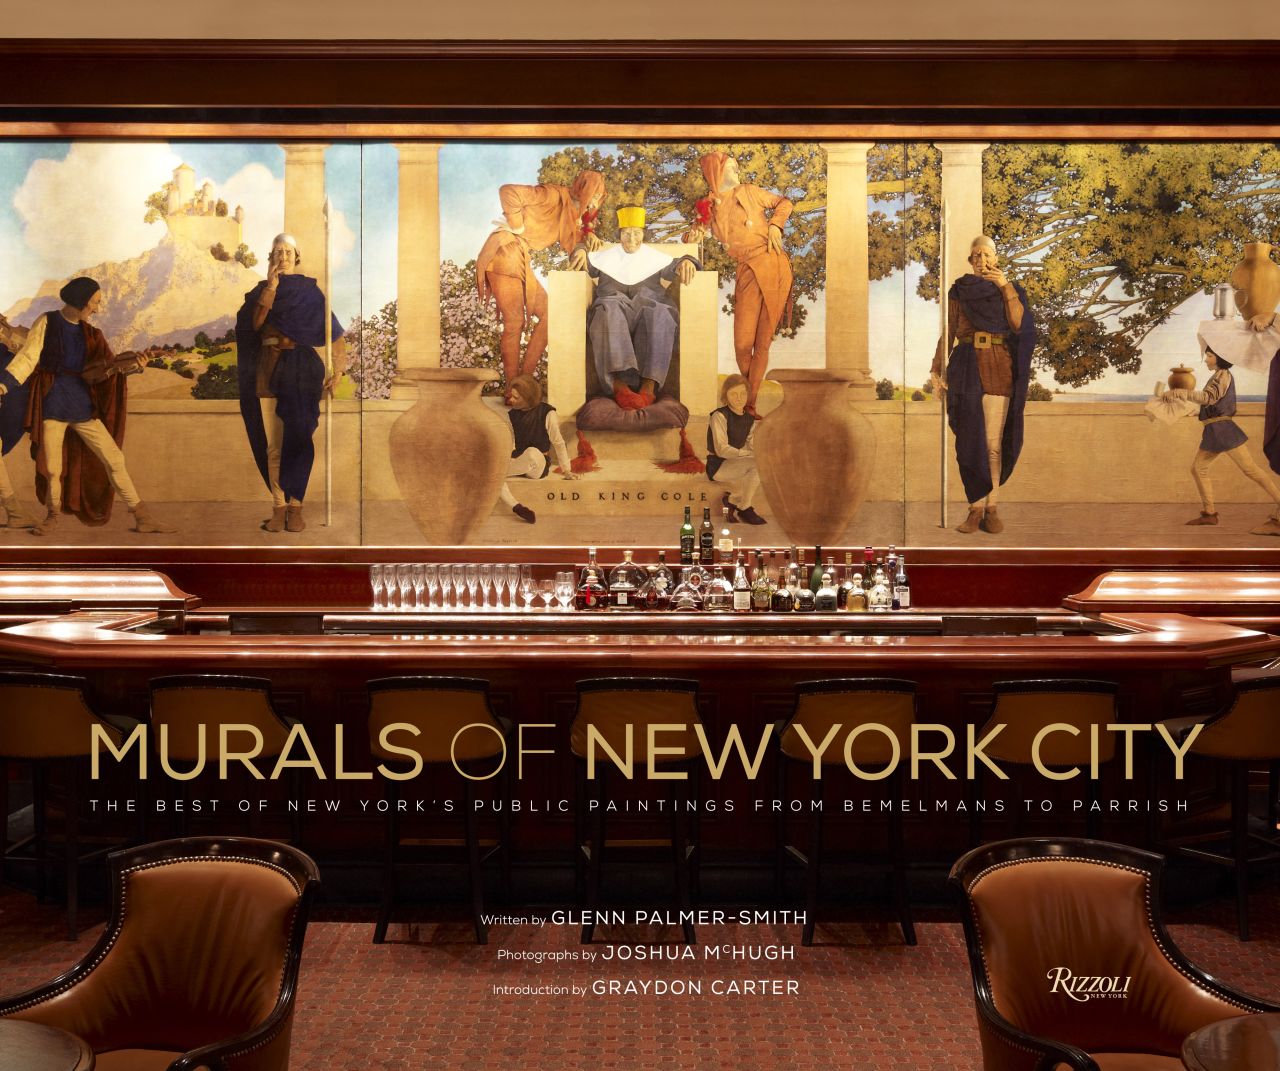 "Murals of New York City" compiles over thirty of New York's best public paintings